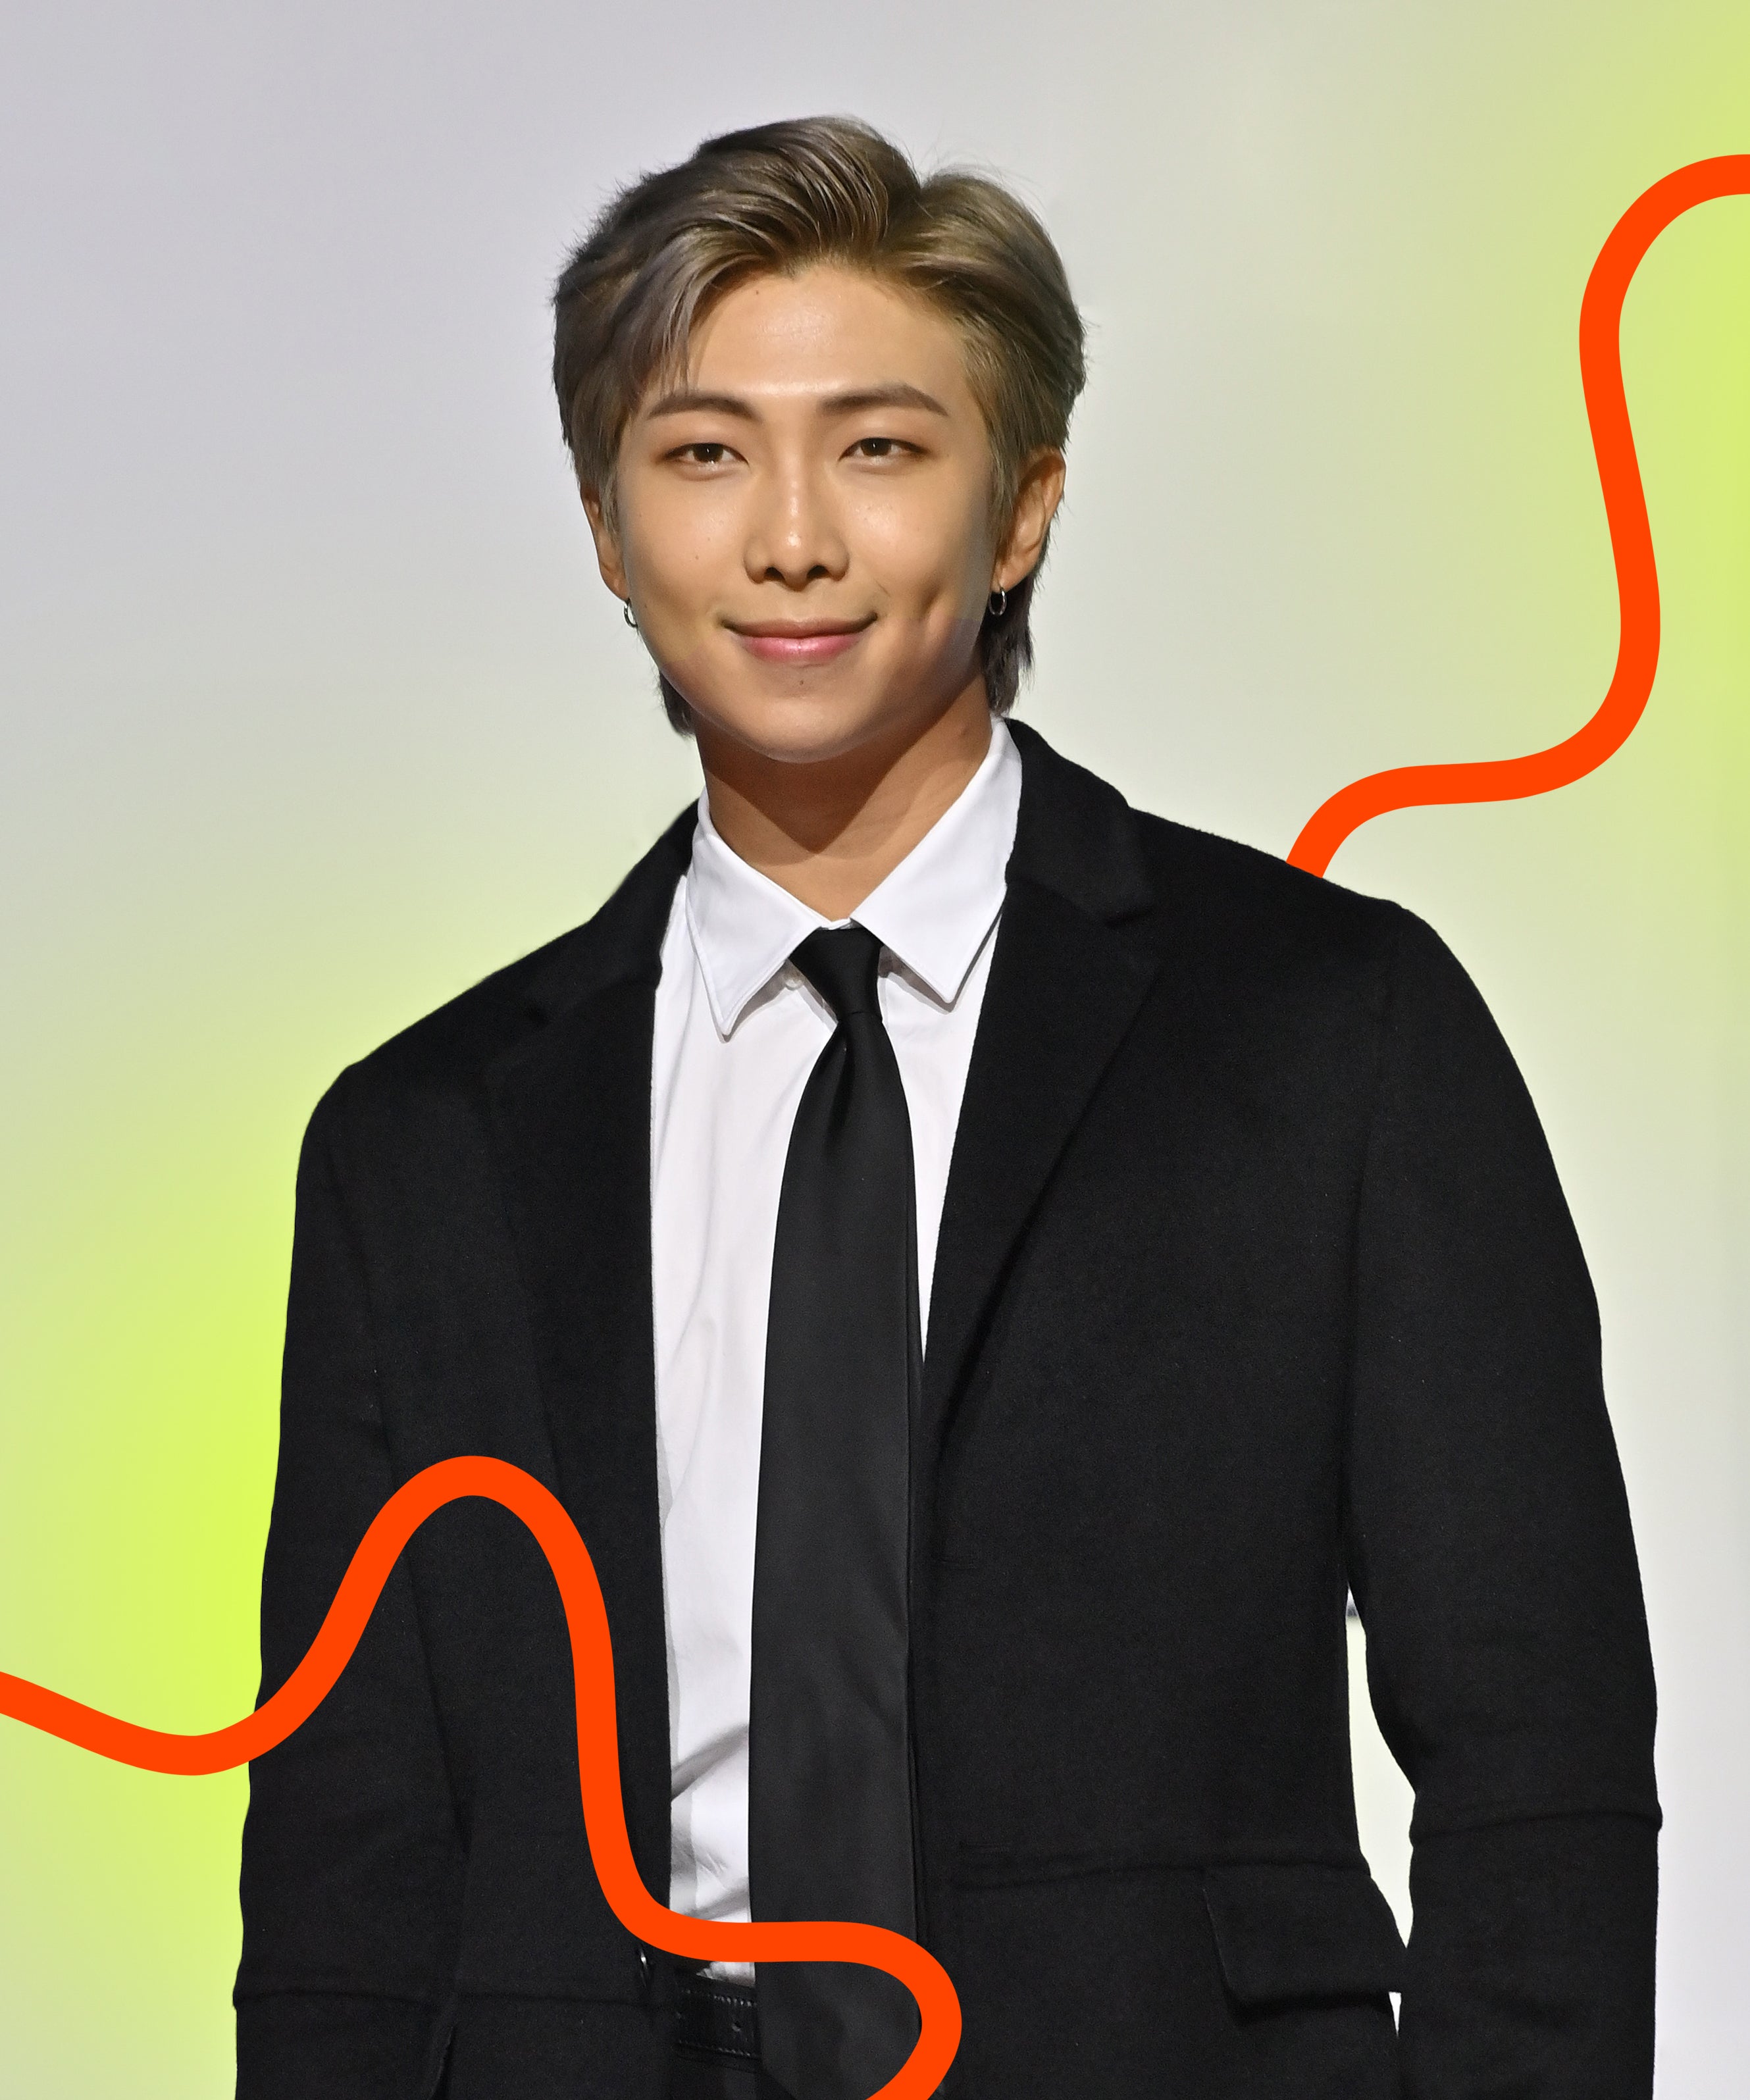 BTS leader RM gets in trouble after sharing that he's listening to